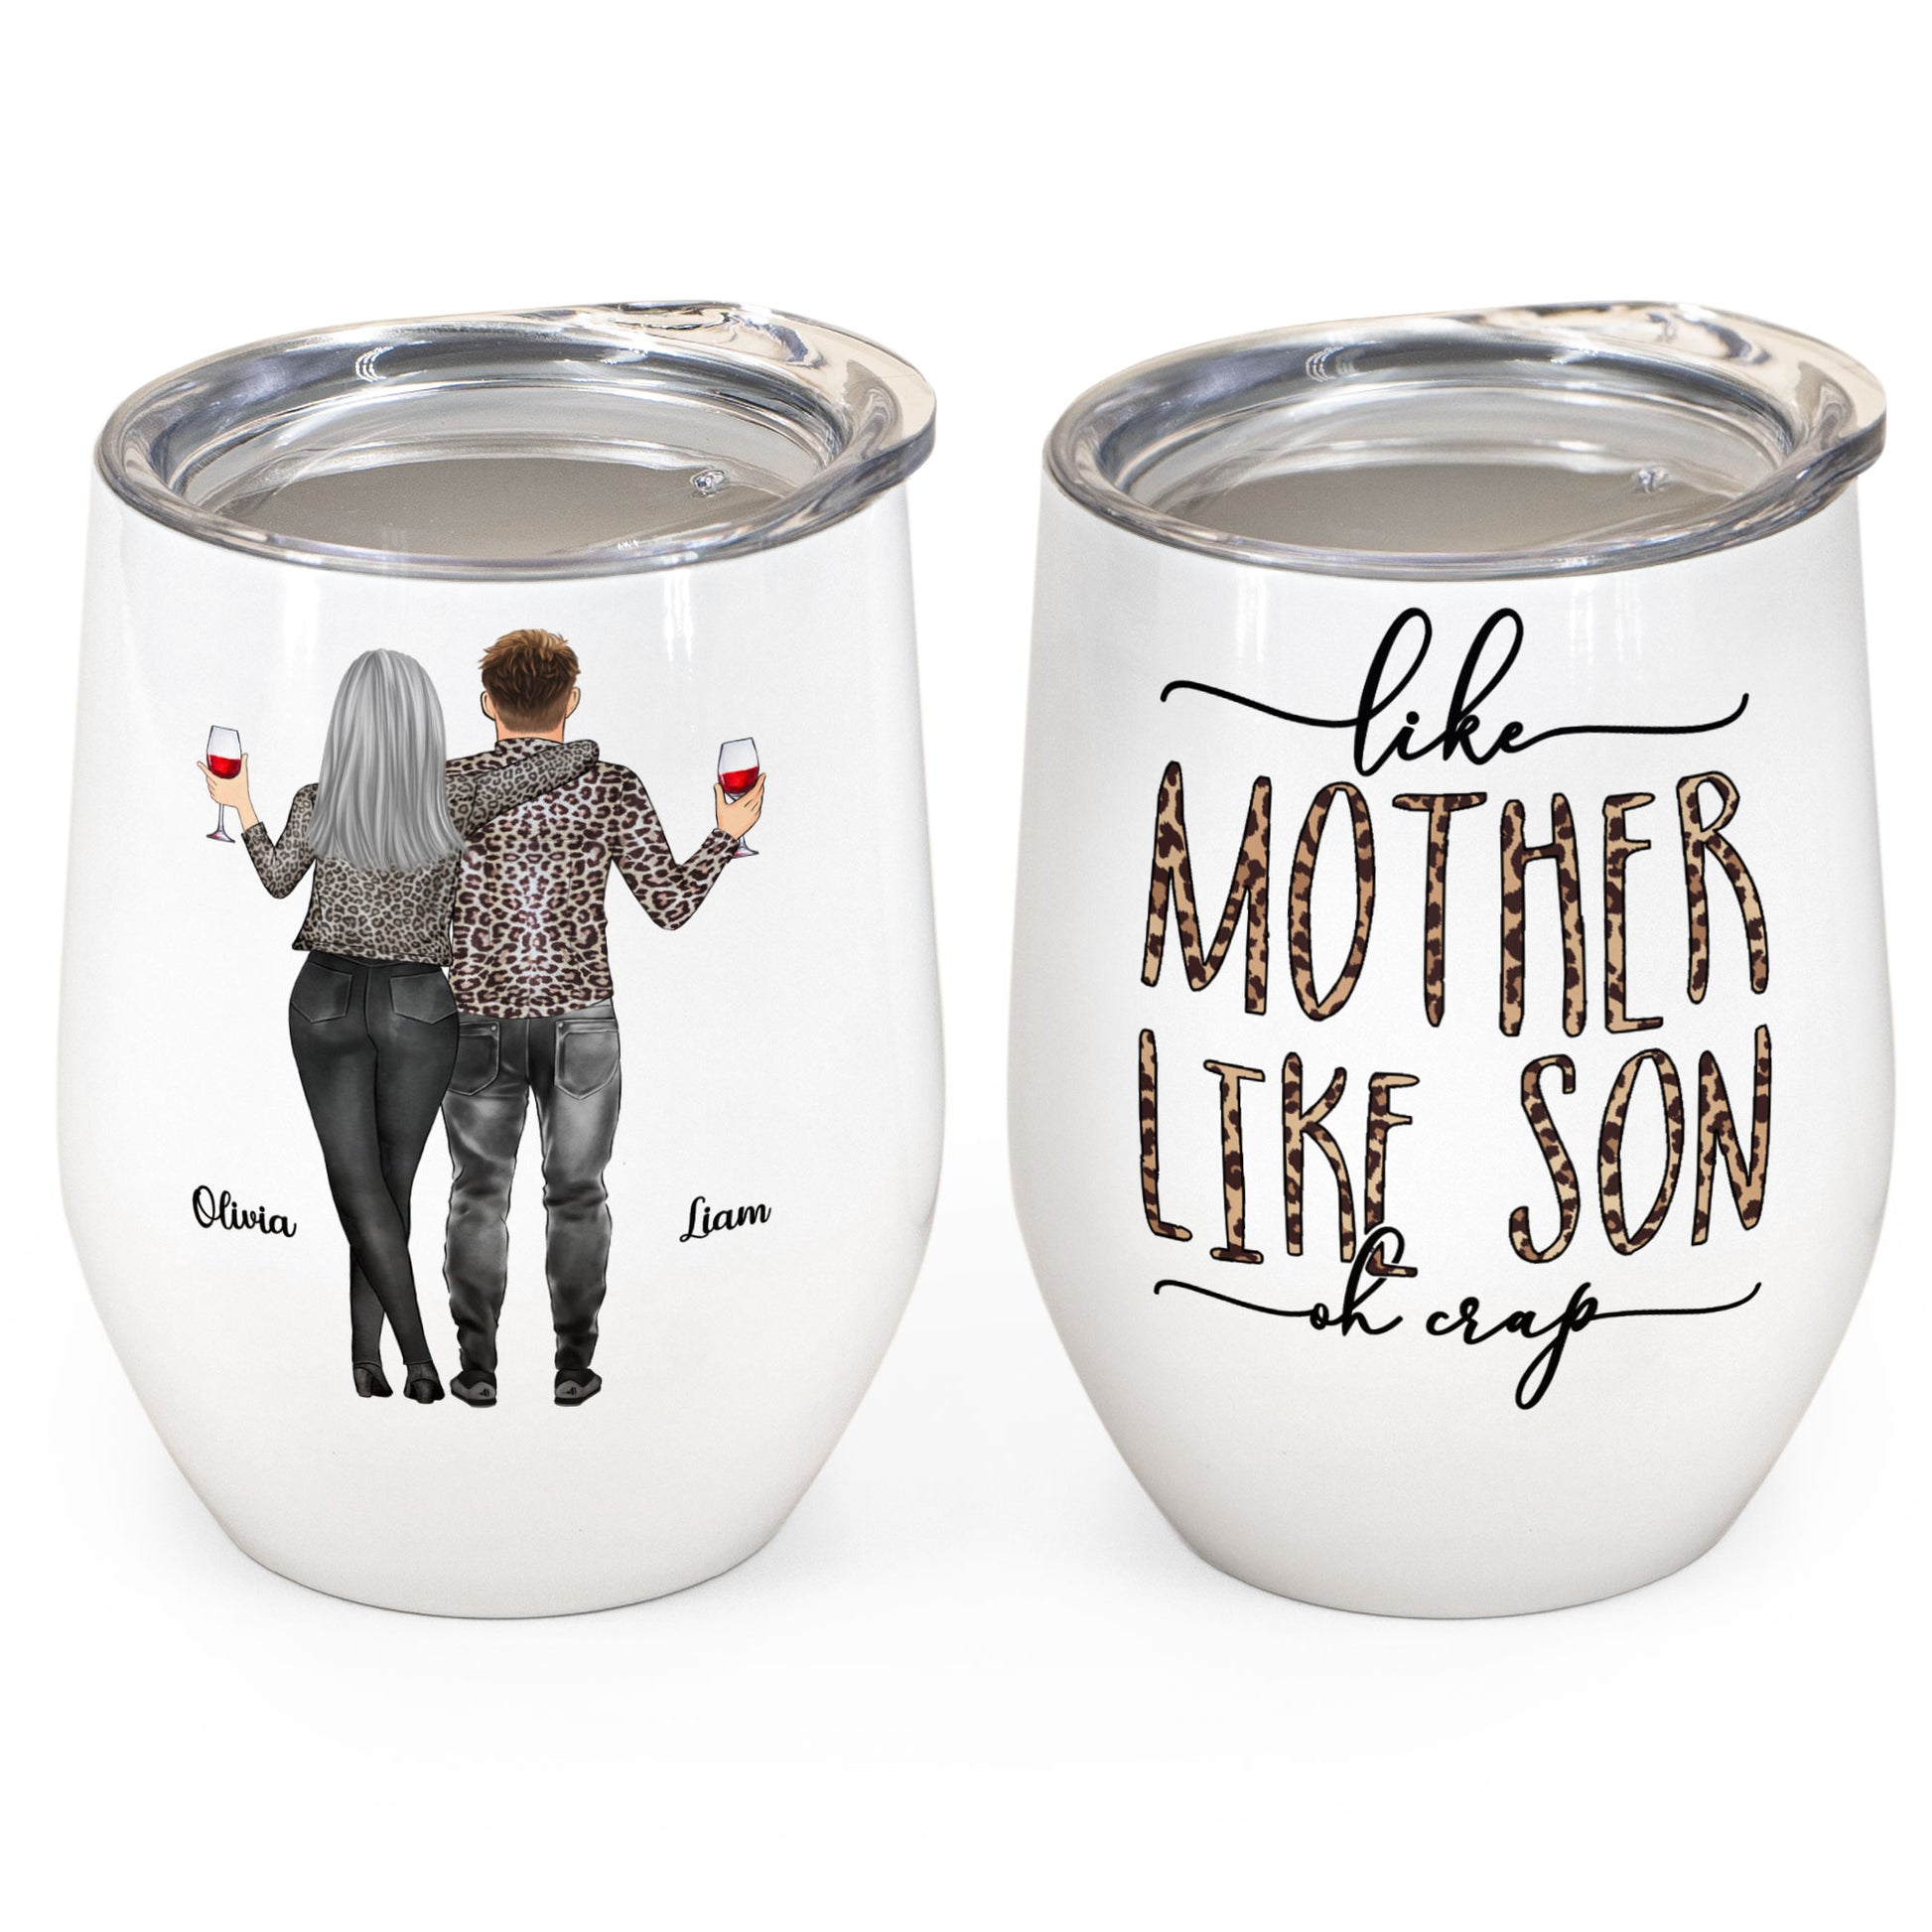 Boy Mom From Son Up Till Son Down - Personalized Wine Tumbler